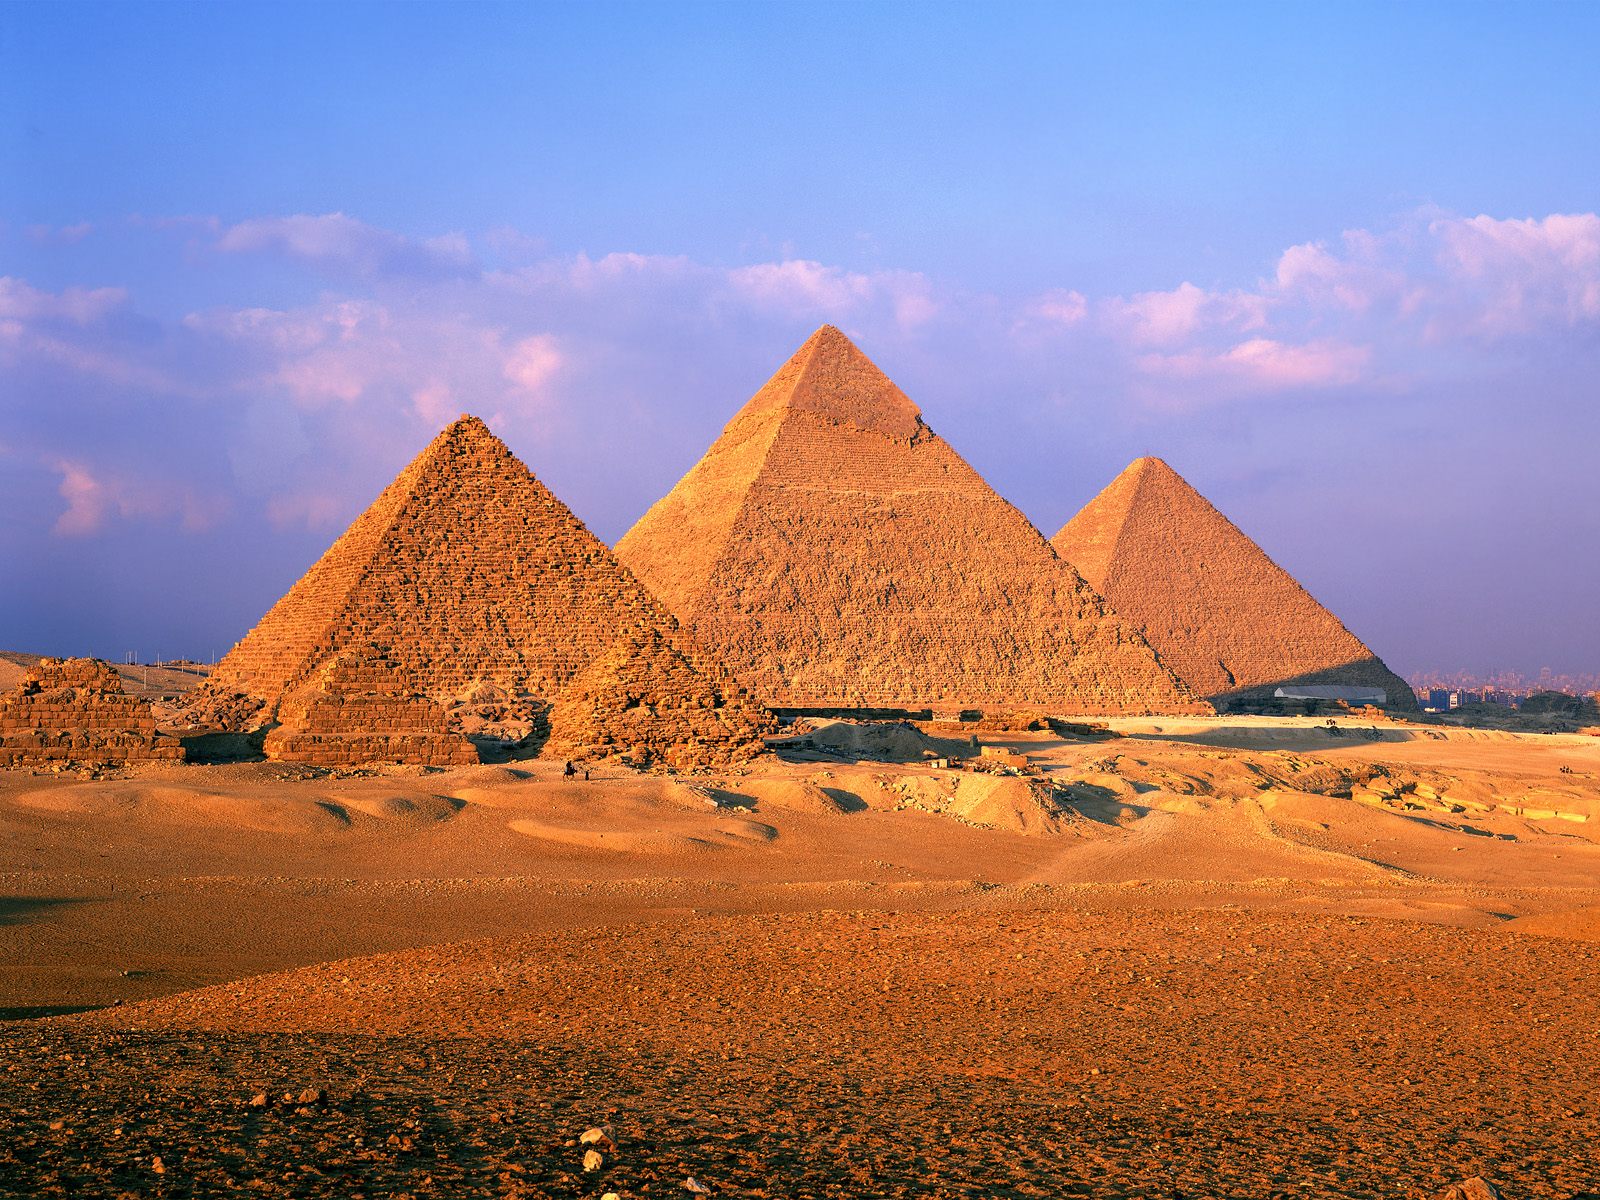 http://www.citypictures.org/data/media/216/Pyramids_of_Giza_Egypt.jpg